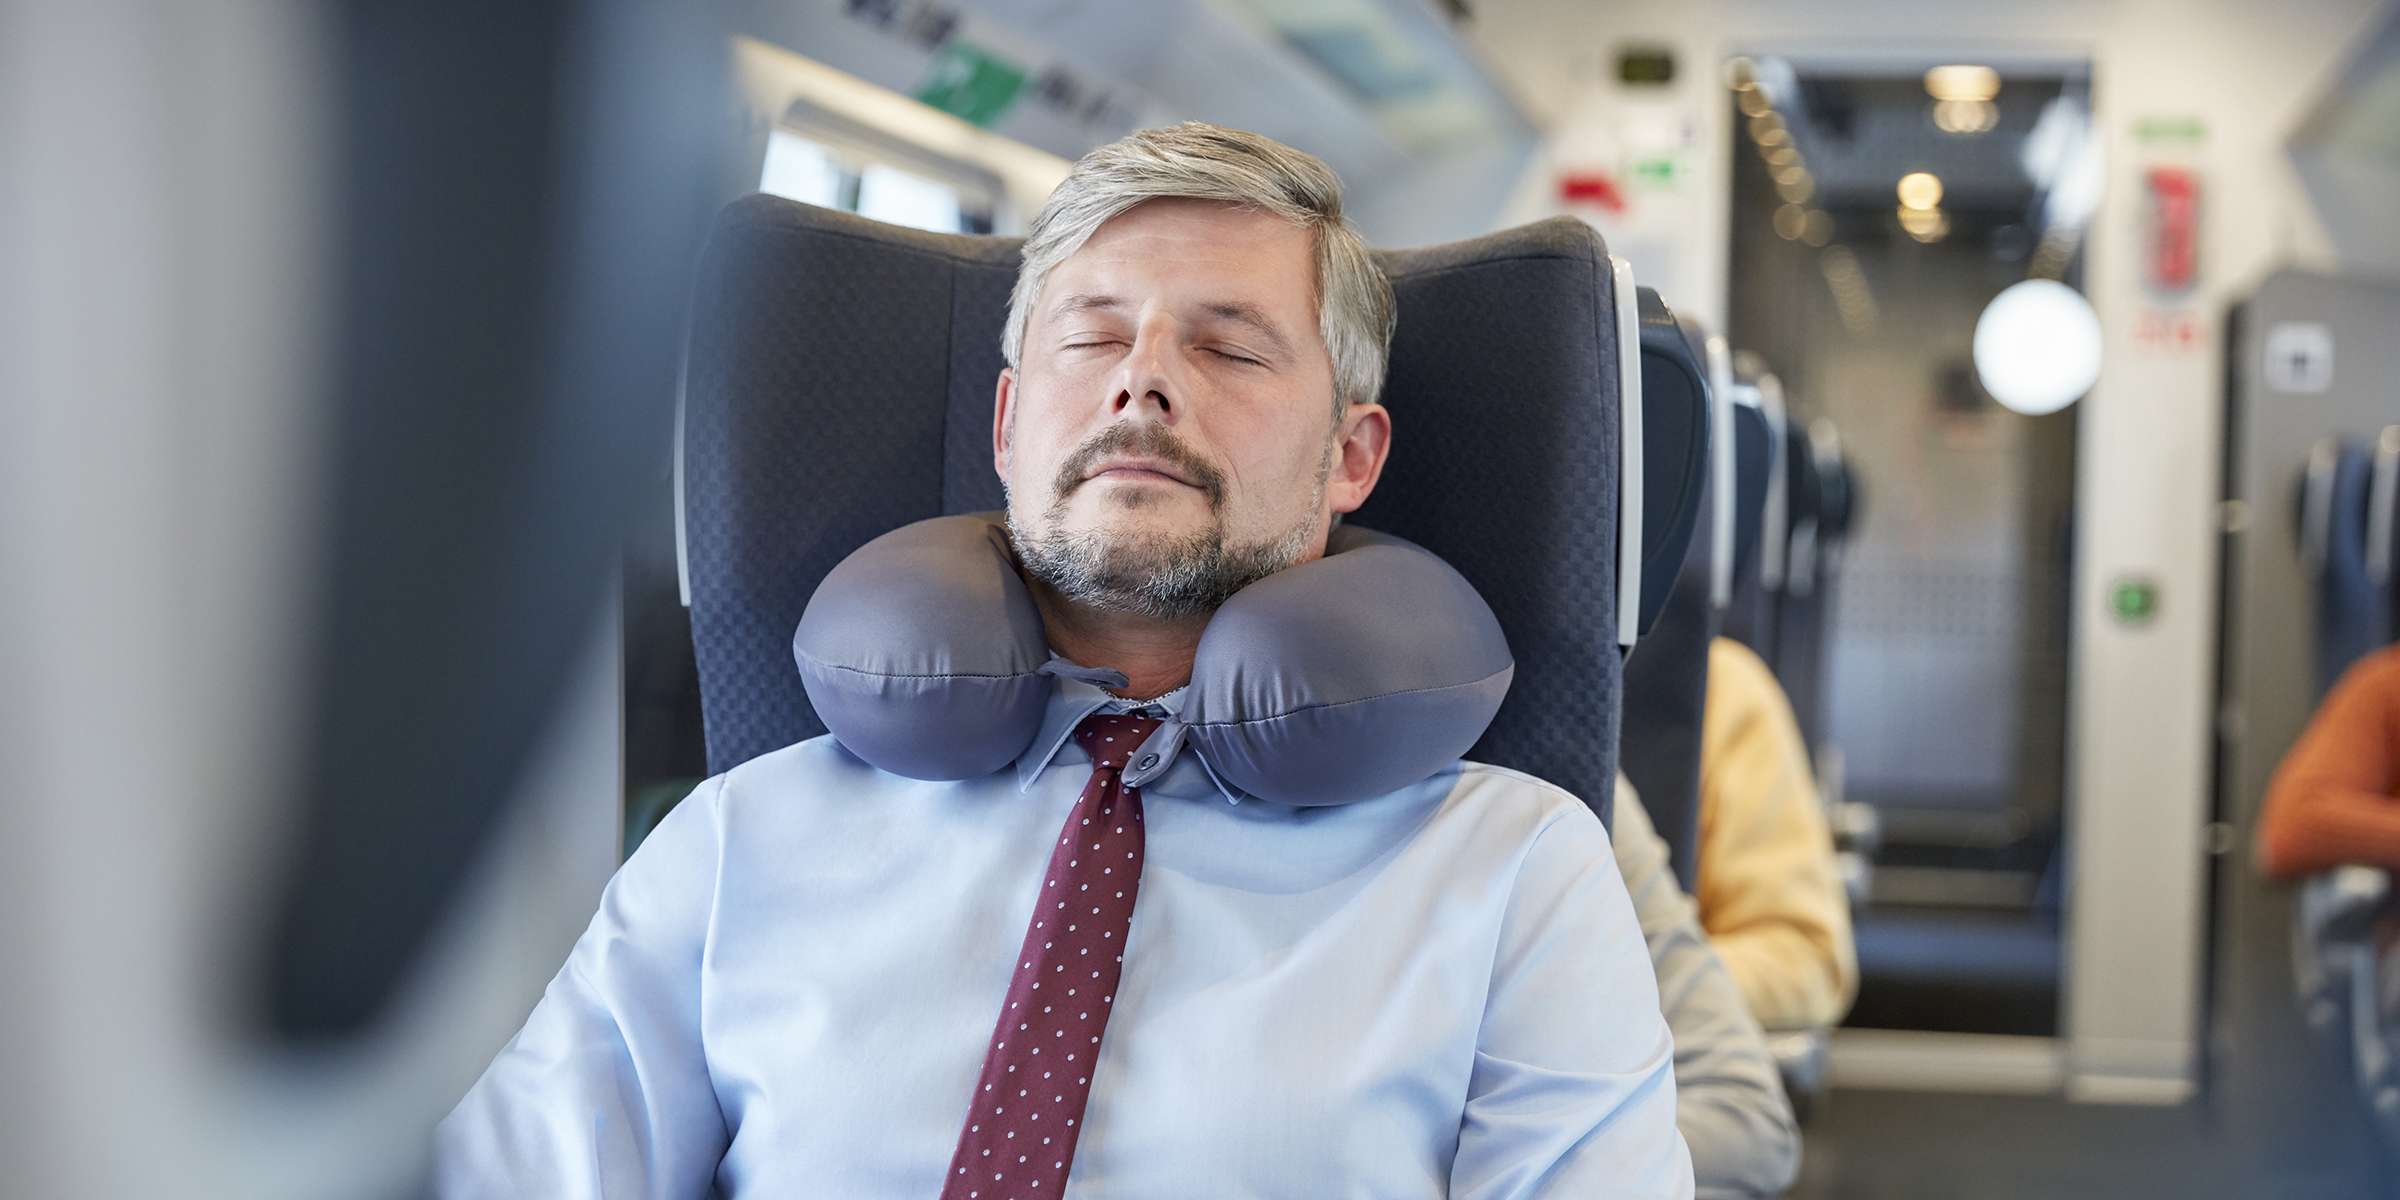 How To Use A Neck Pillow